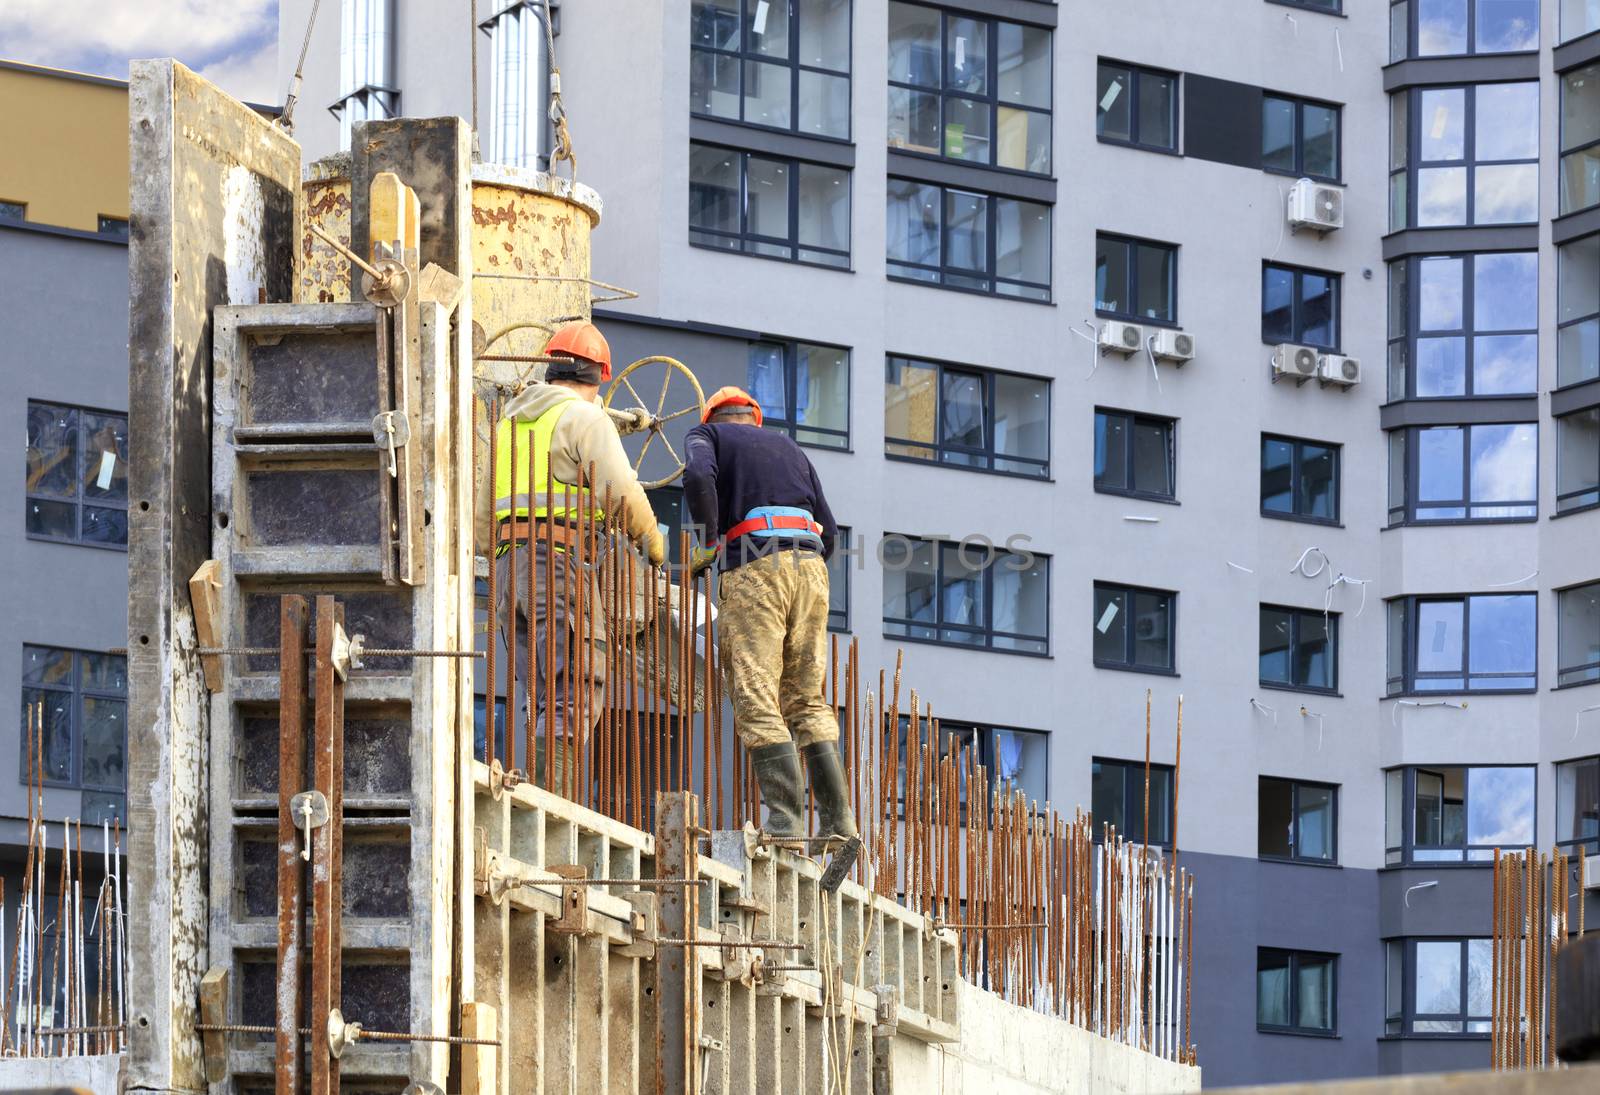 Workers poured concrete in the formwork of the walls on the construction of the new house against the background of a modern residential building.